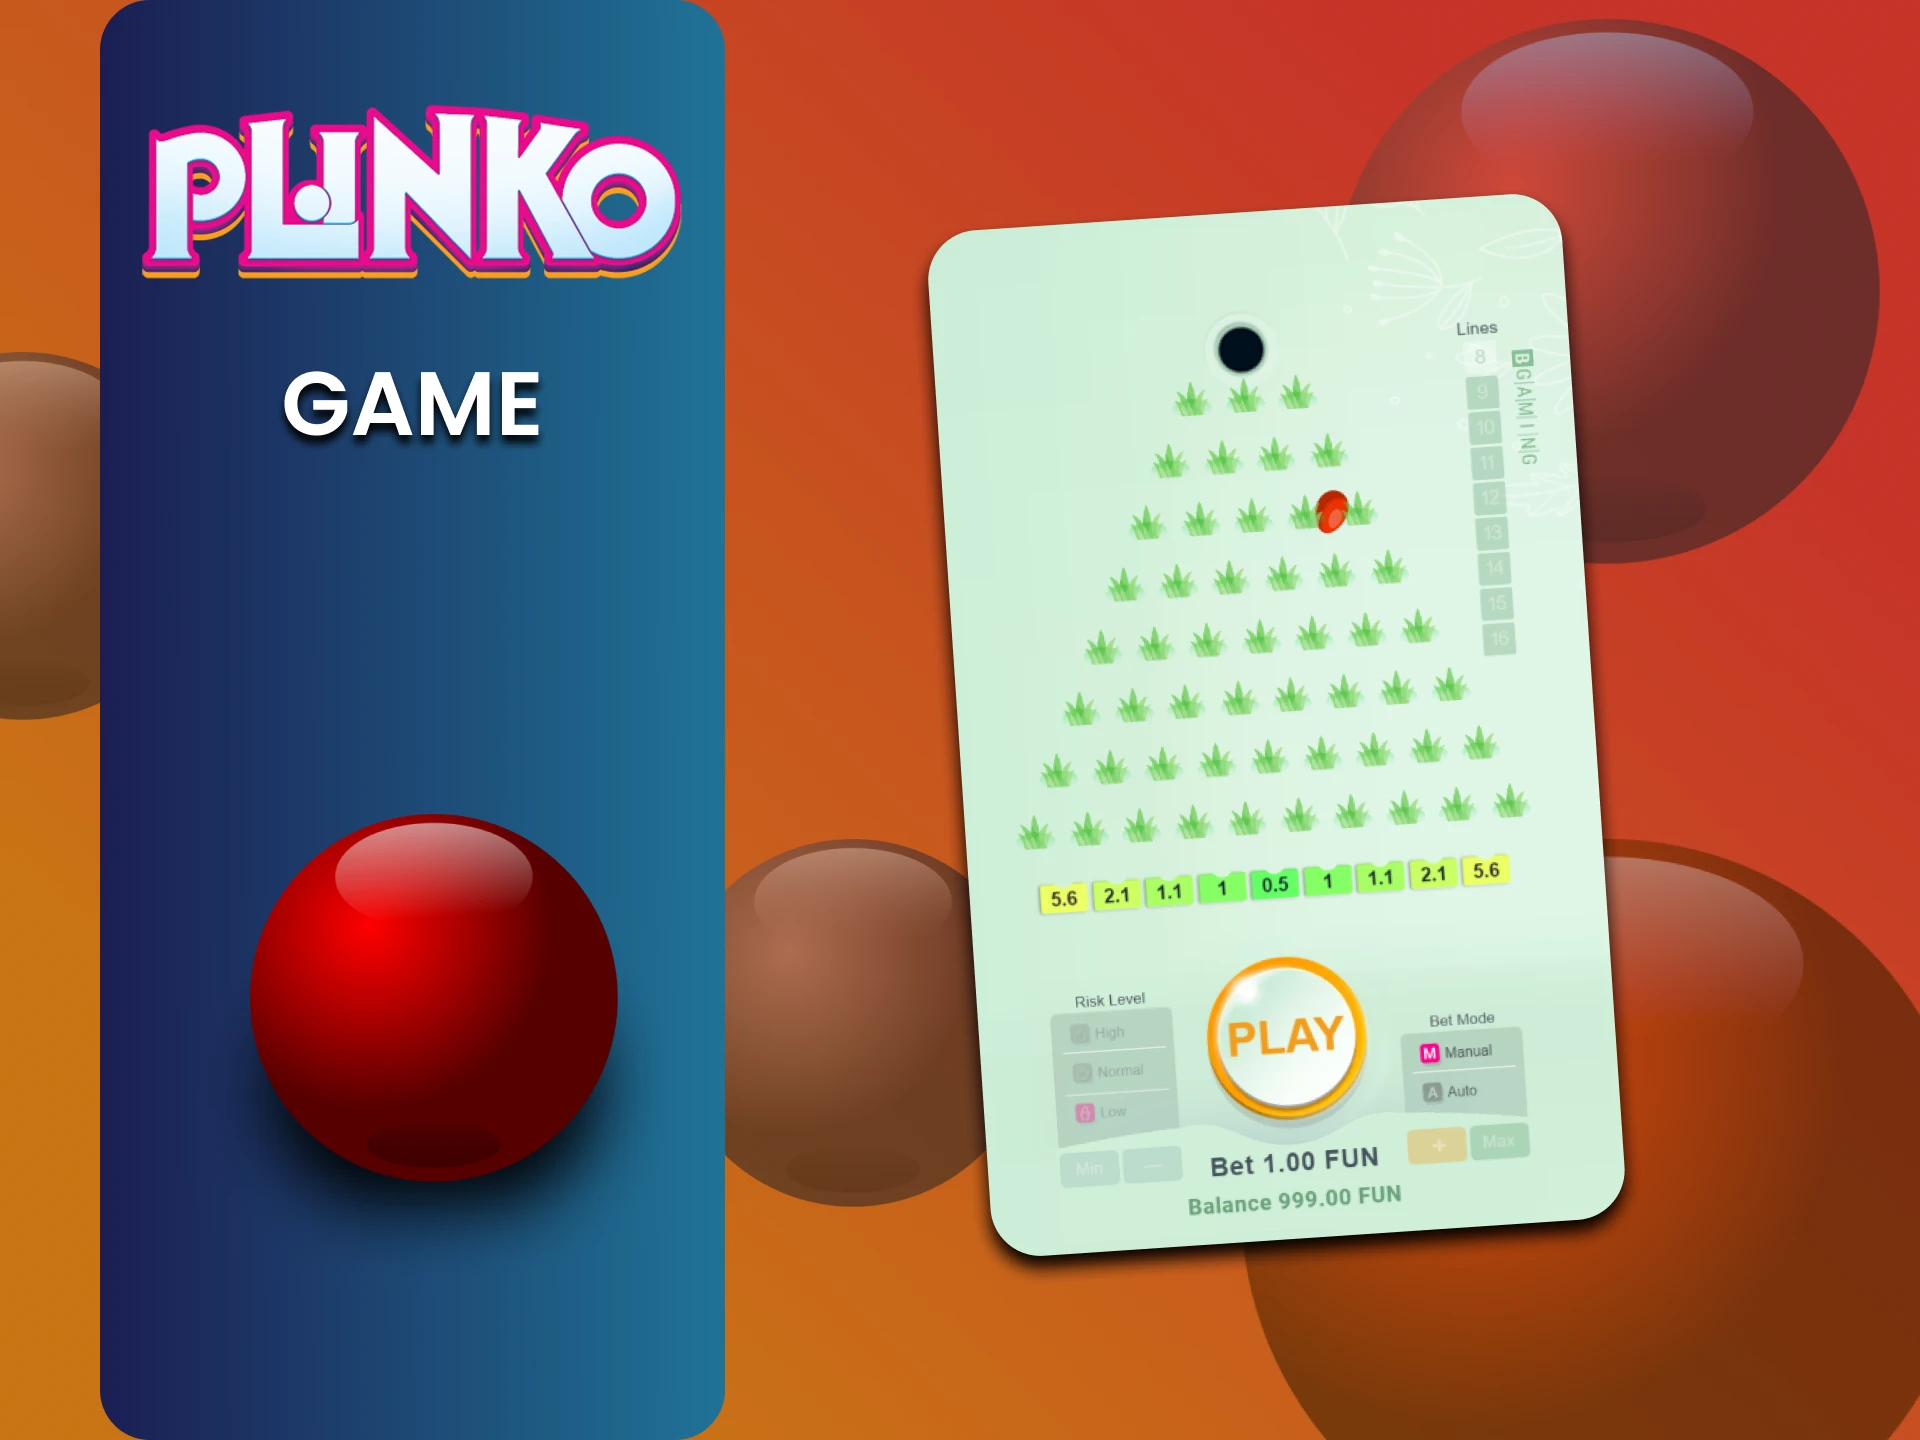 Find out all about Plinko on Bambet.